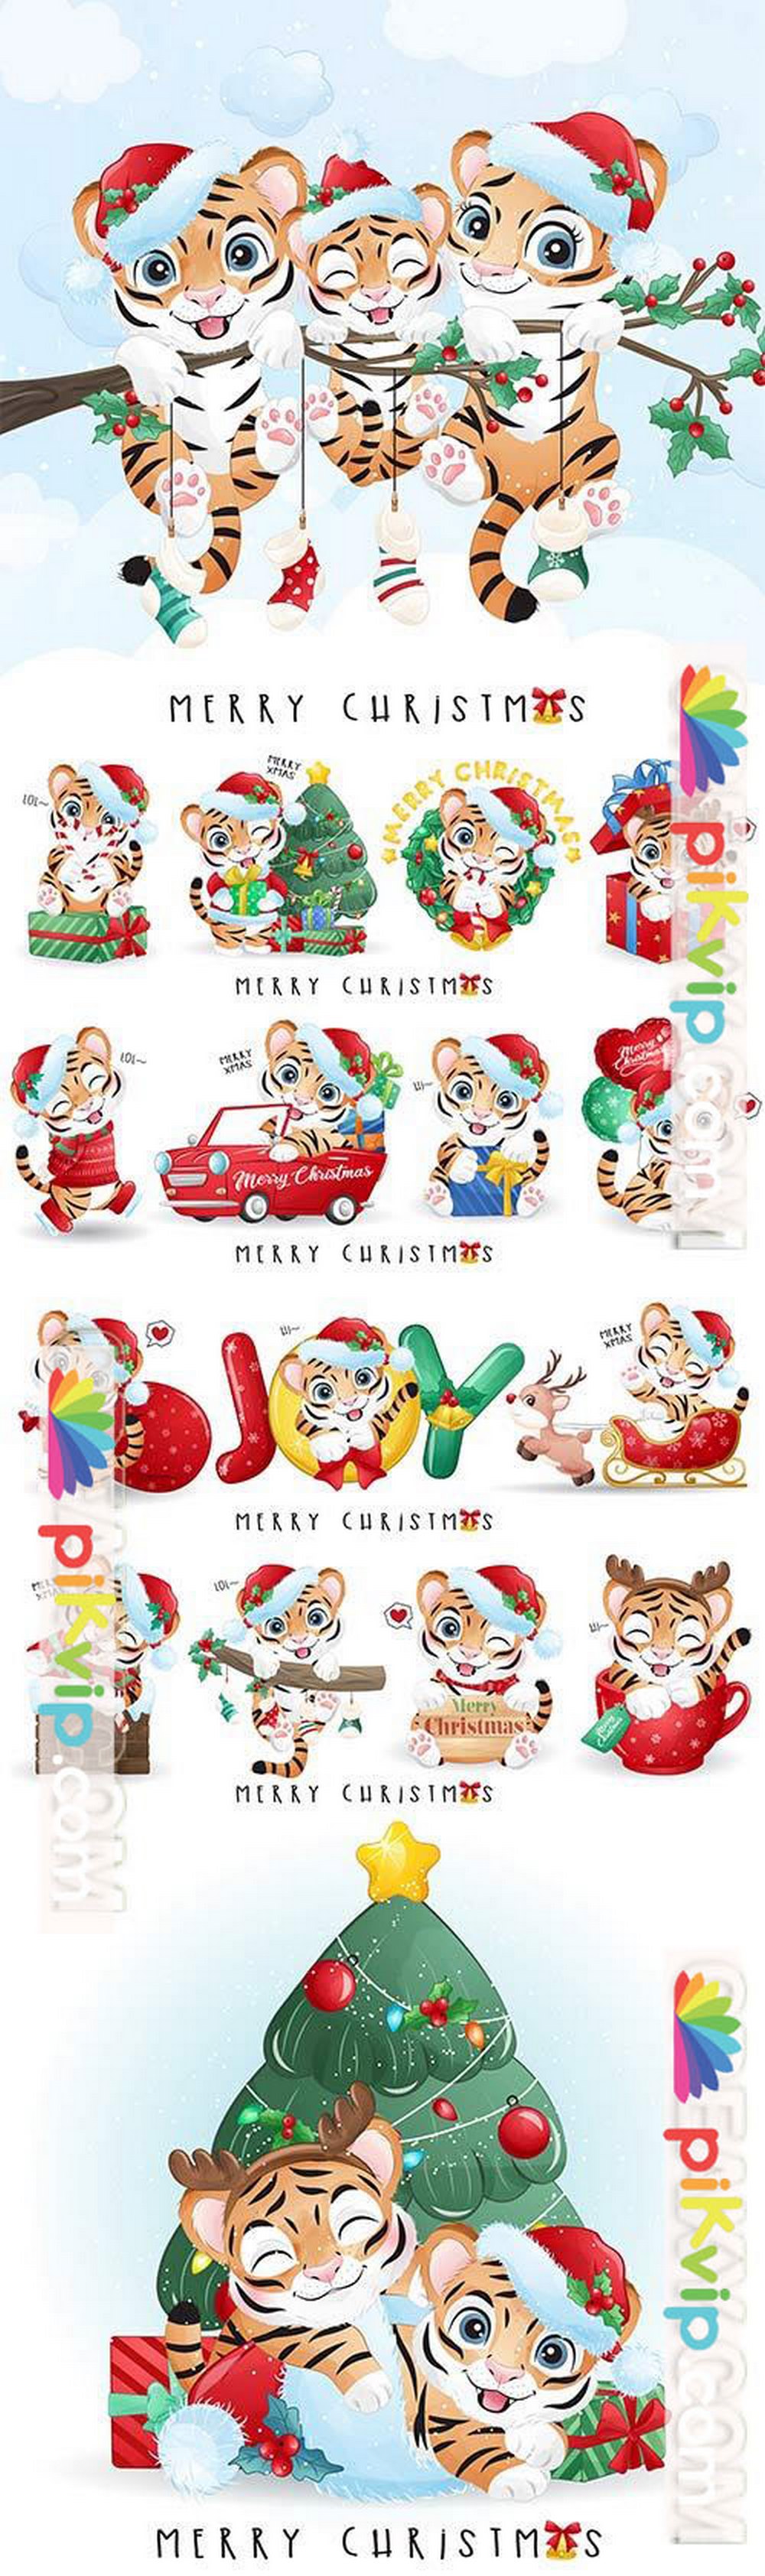 Cute doodle tiger for merry christmas illustration set premium vector